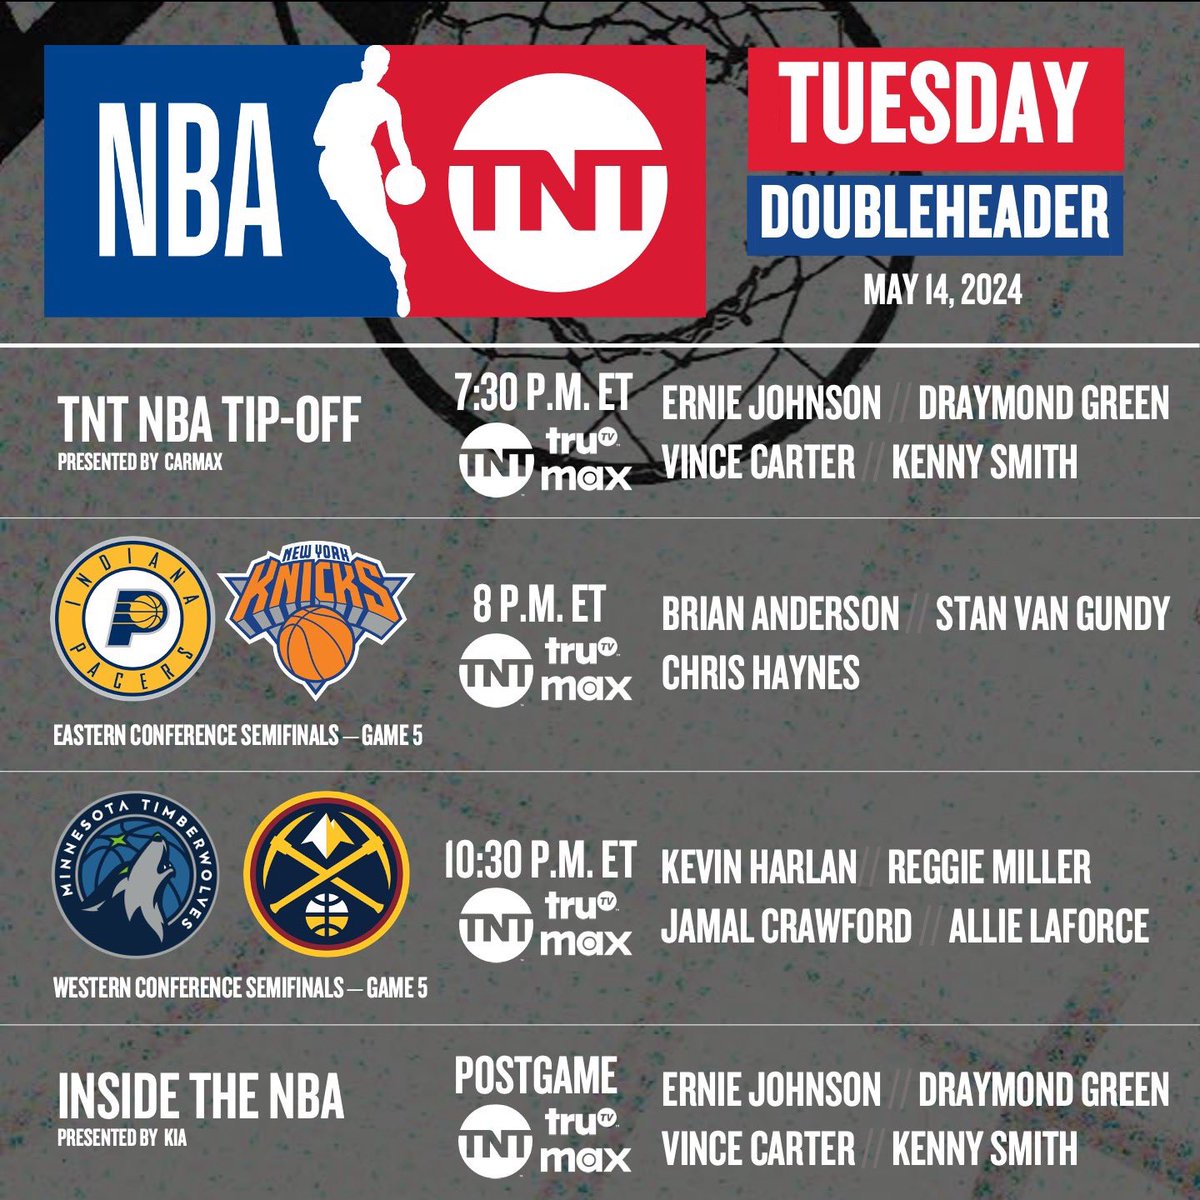 Vince Carter and Draymond Green will BOTH be at the desk tonight in Studio J for TNT’s #NBAPlayoffs pre and postgame coverage!🍿 ⏰ 7:30 PM ET 📺 TNT, truTV, and @SportsonMax!